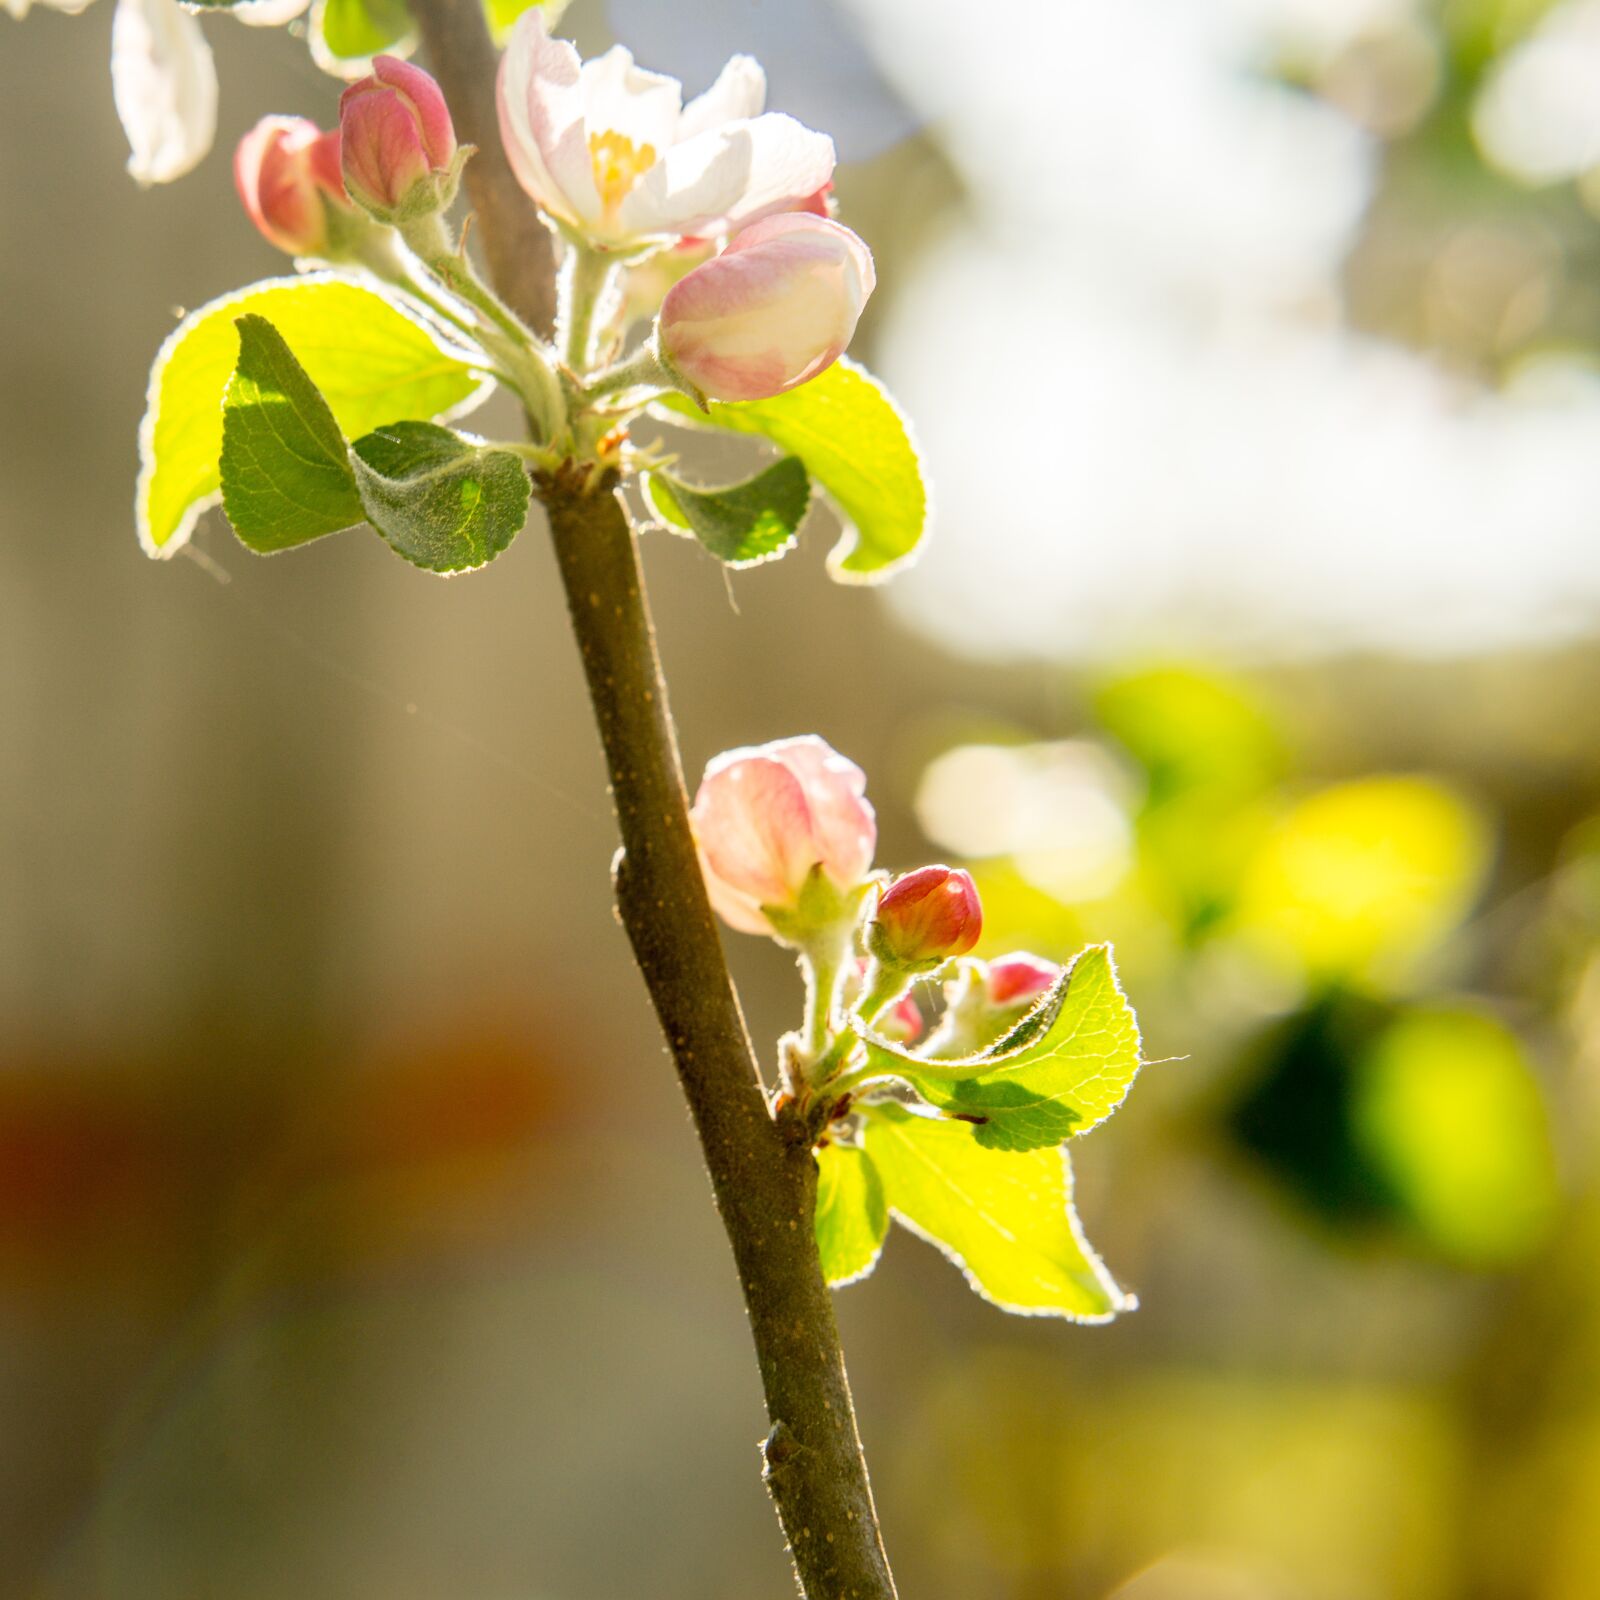 ZEISS Batis 85mm F1.8 sample photo. Apple tree, blossom, bloom photography